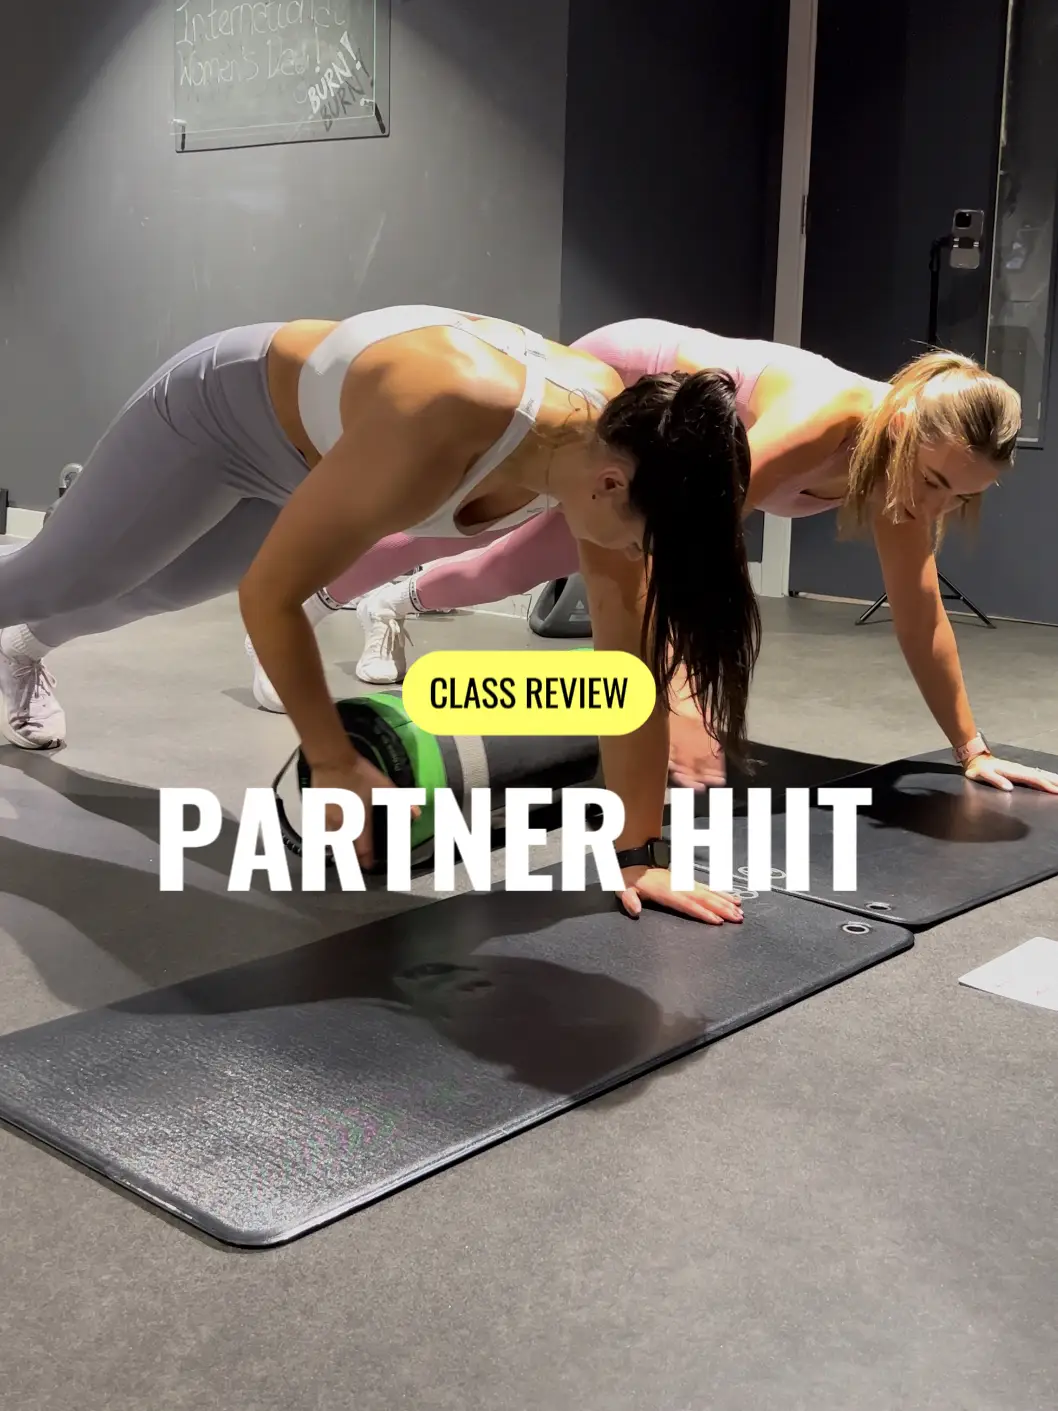 CLASS REVIEW: PARTNER HIIT WORKOUT, Video published by NAOMICLAIREFIT